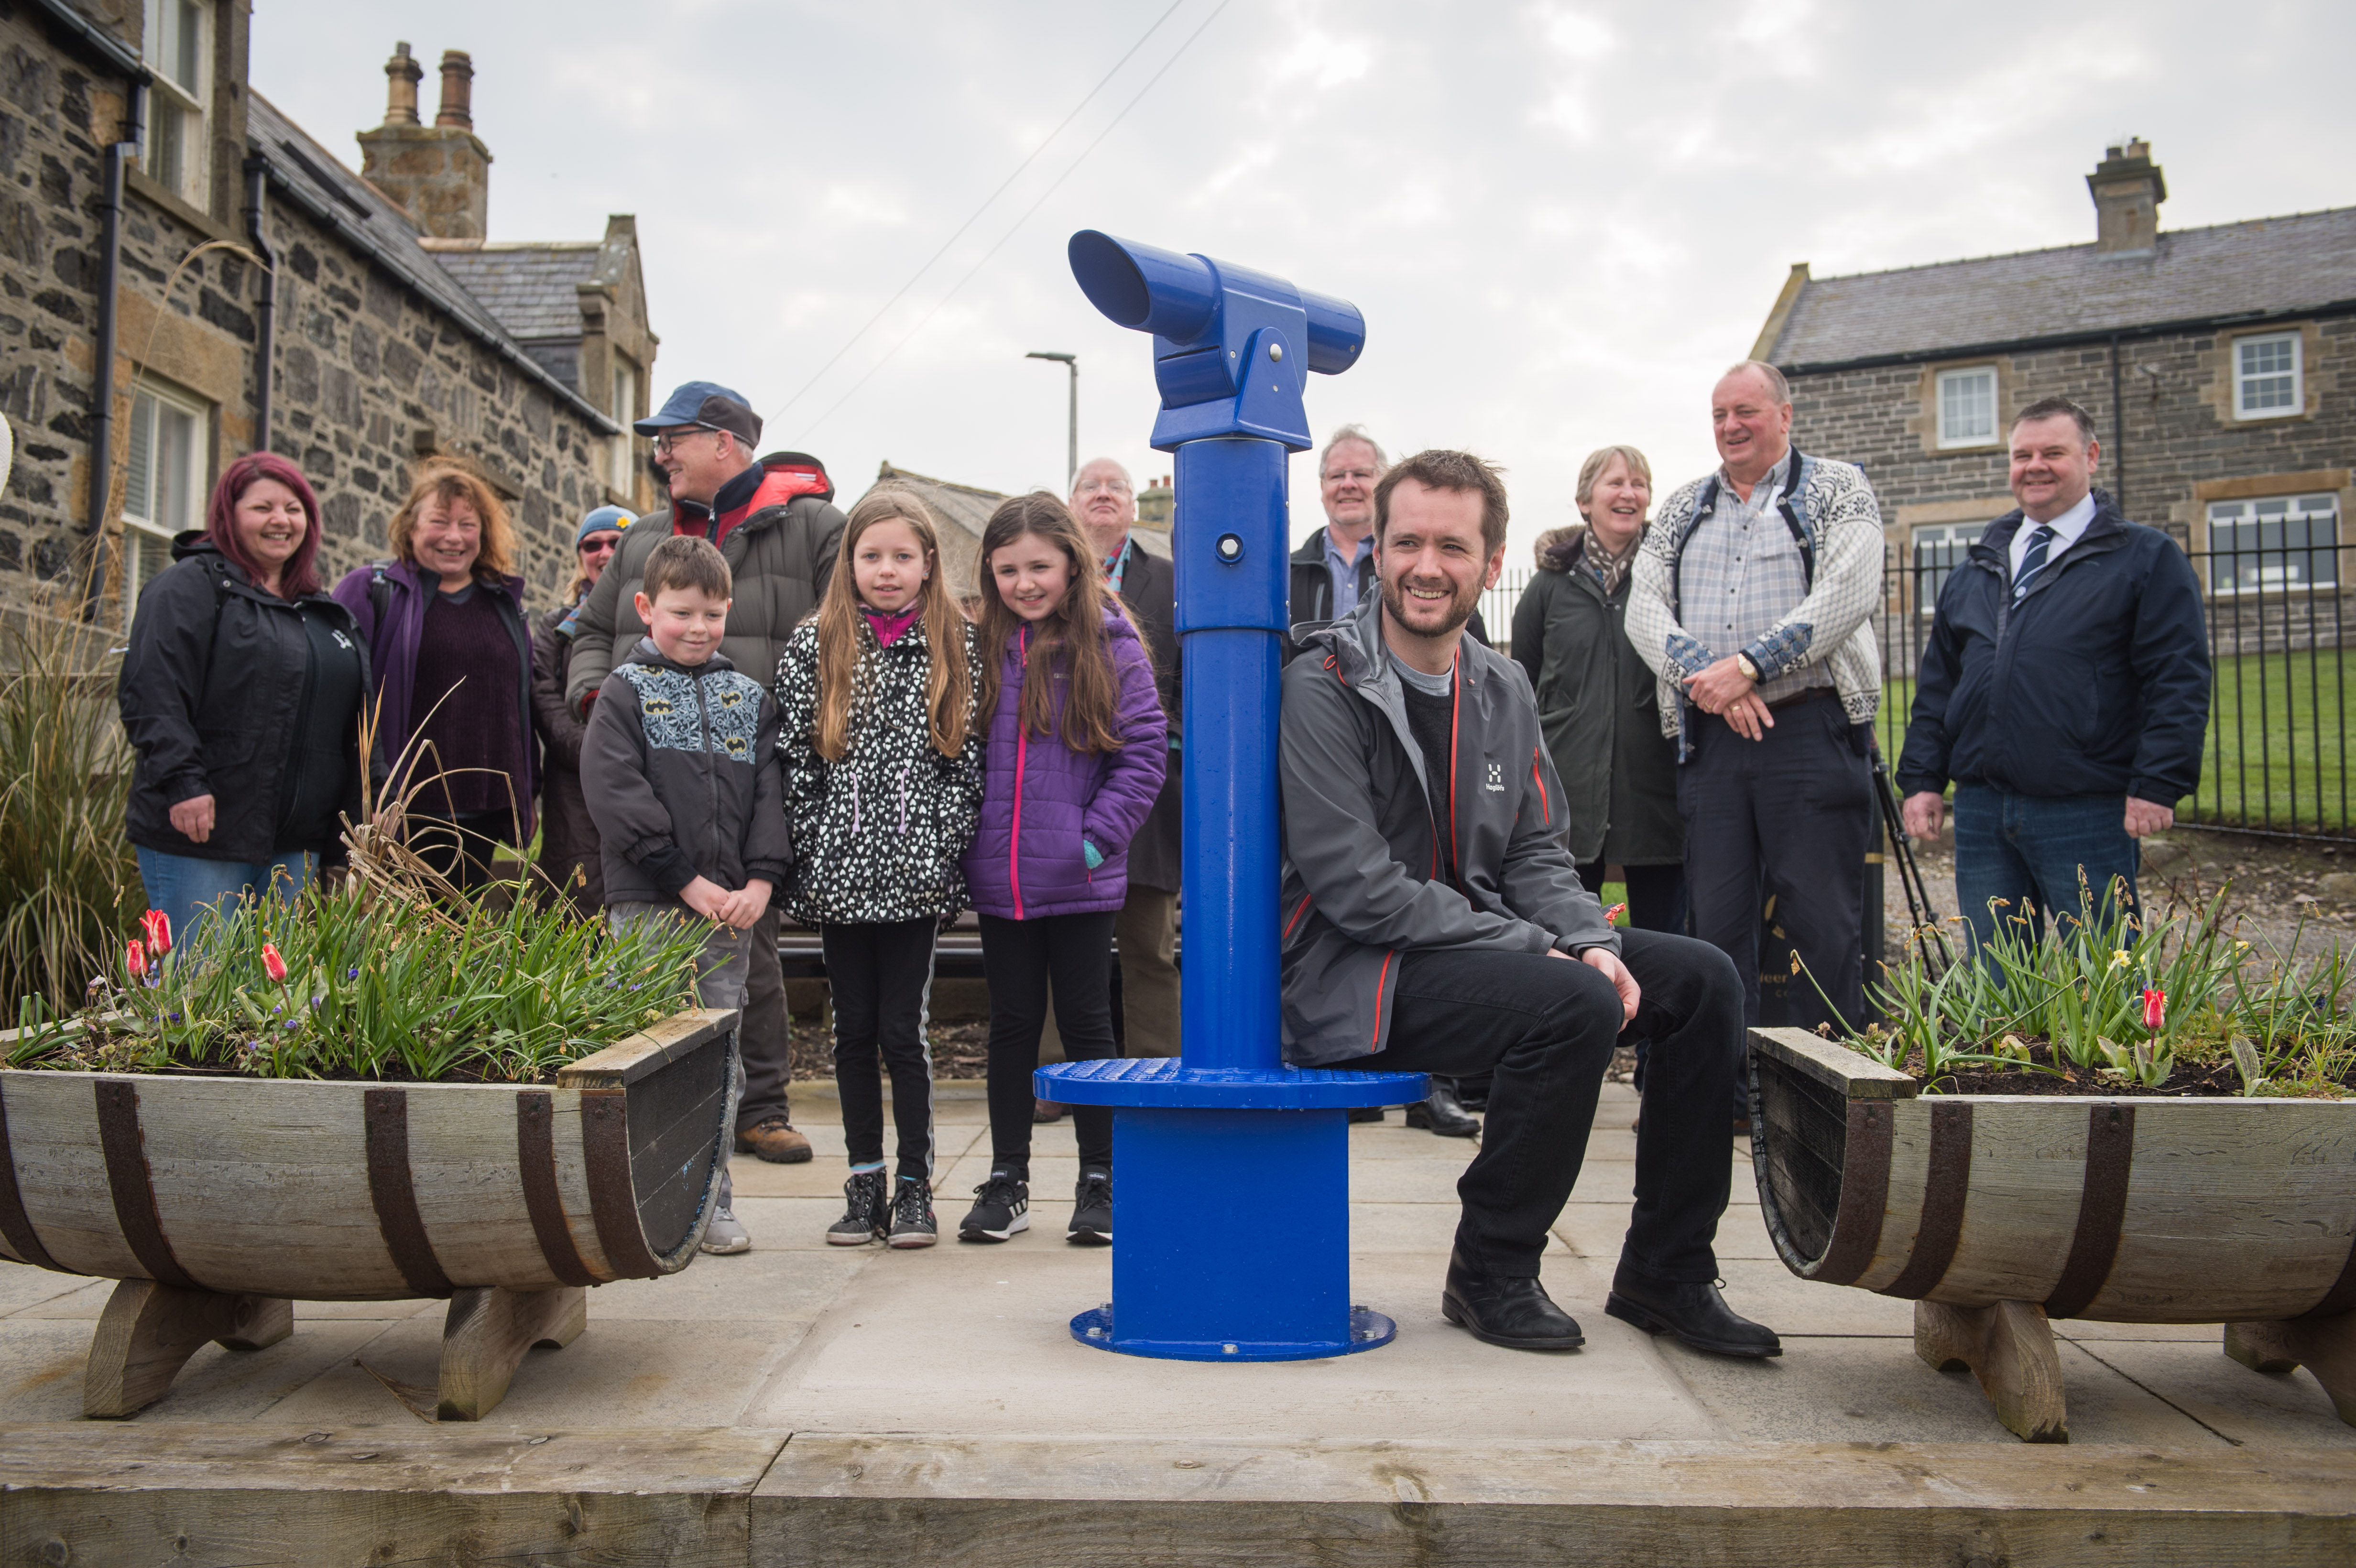 Portsoy community council instal a new telescope at the town’s harbour. The community council have paid for the device which offers views of the harbour and the Moray Firth. It was officially opened by Whisky Galore! actor Sean Biggerstaff.

Pictures: Jason Hedges